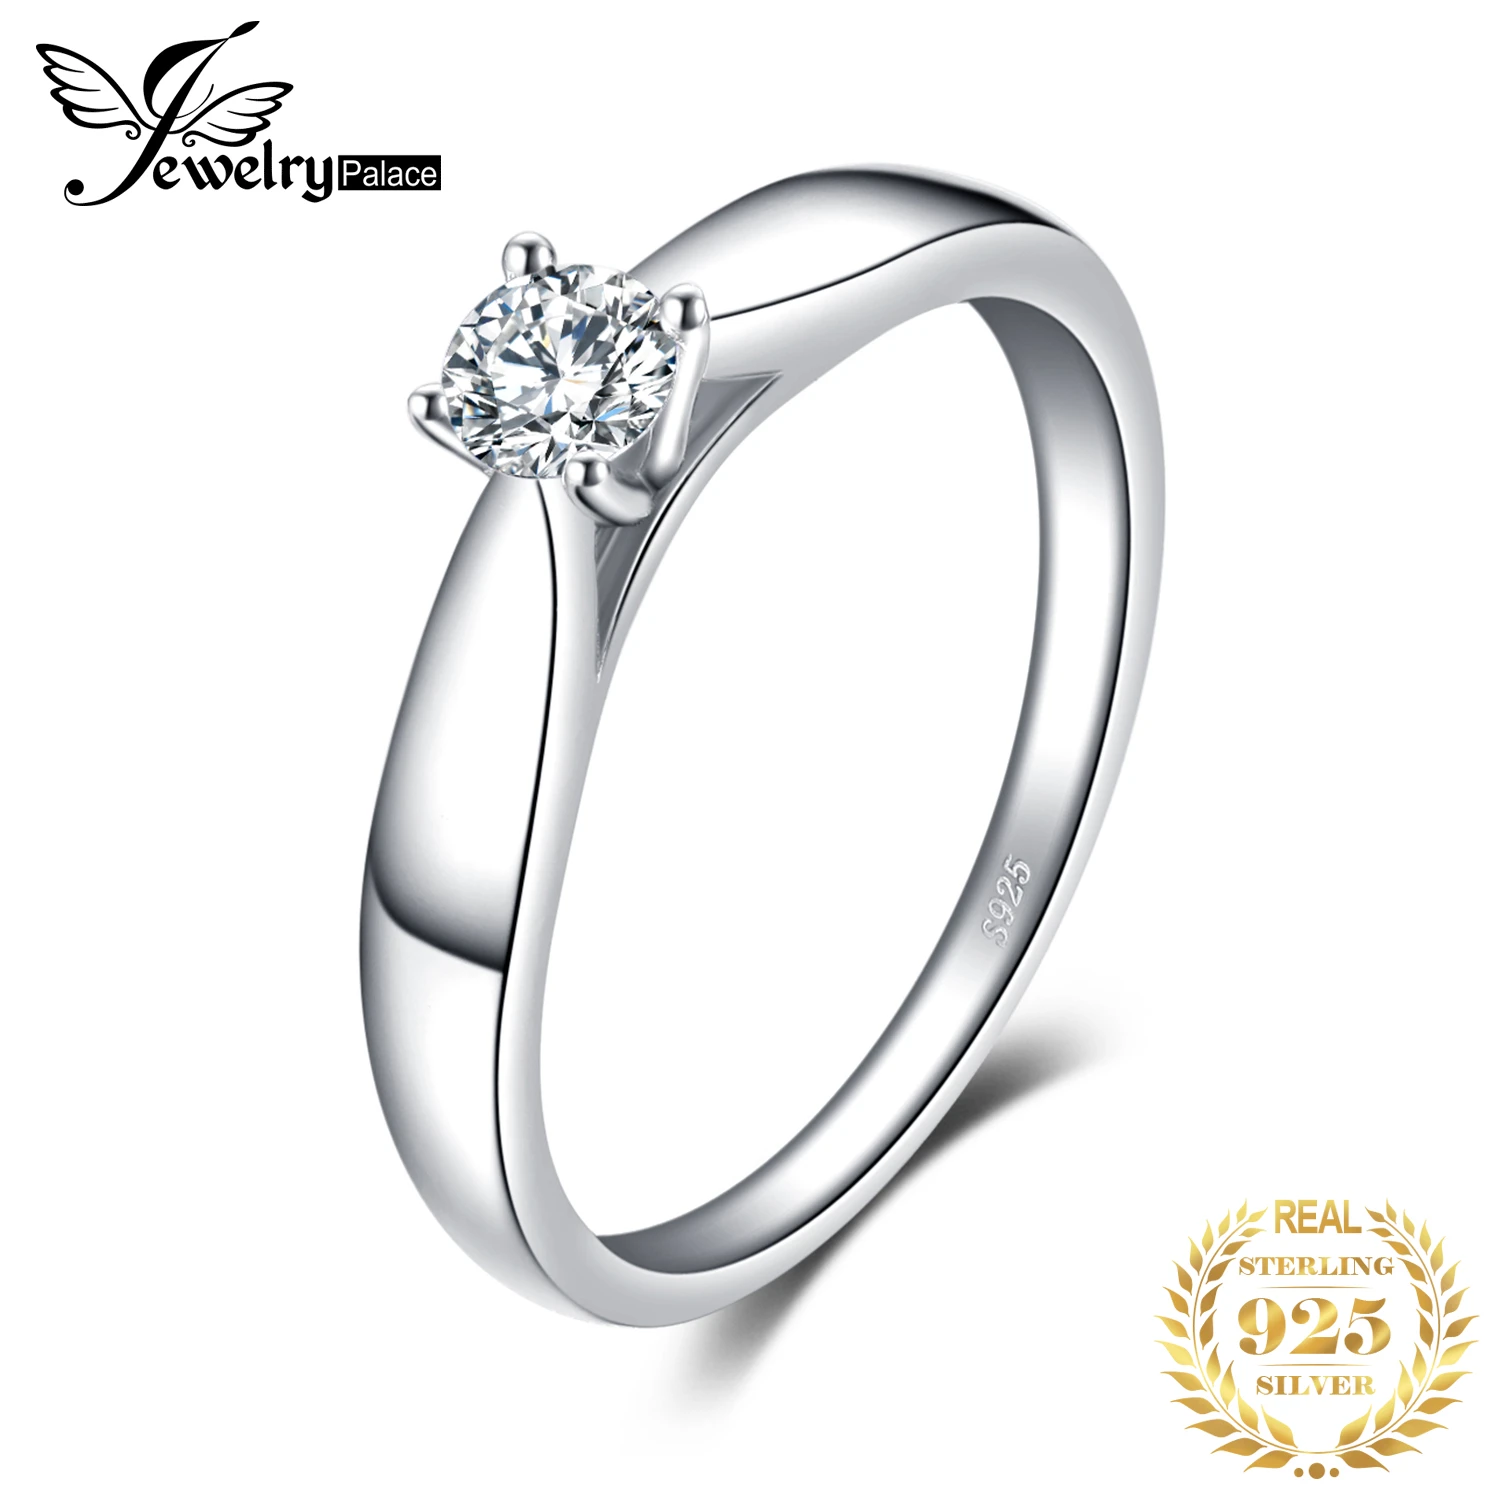 JewelryPalace Engagement Ring 925 Sterling Silver Rings for Women Solitaire Anniversary Wedding Band Silver 925 Jewelry Fashion